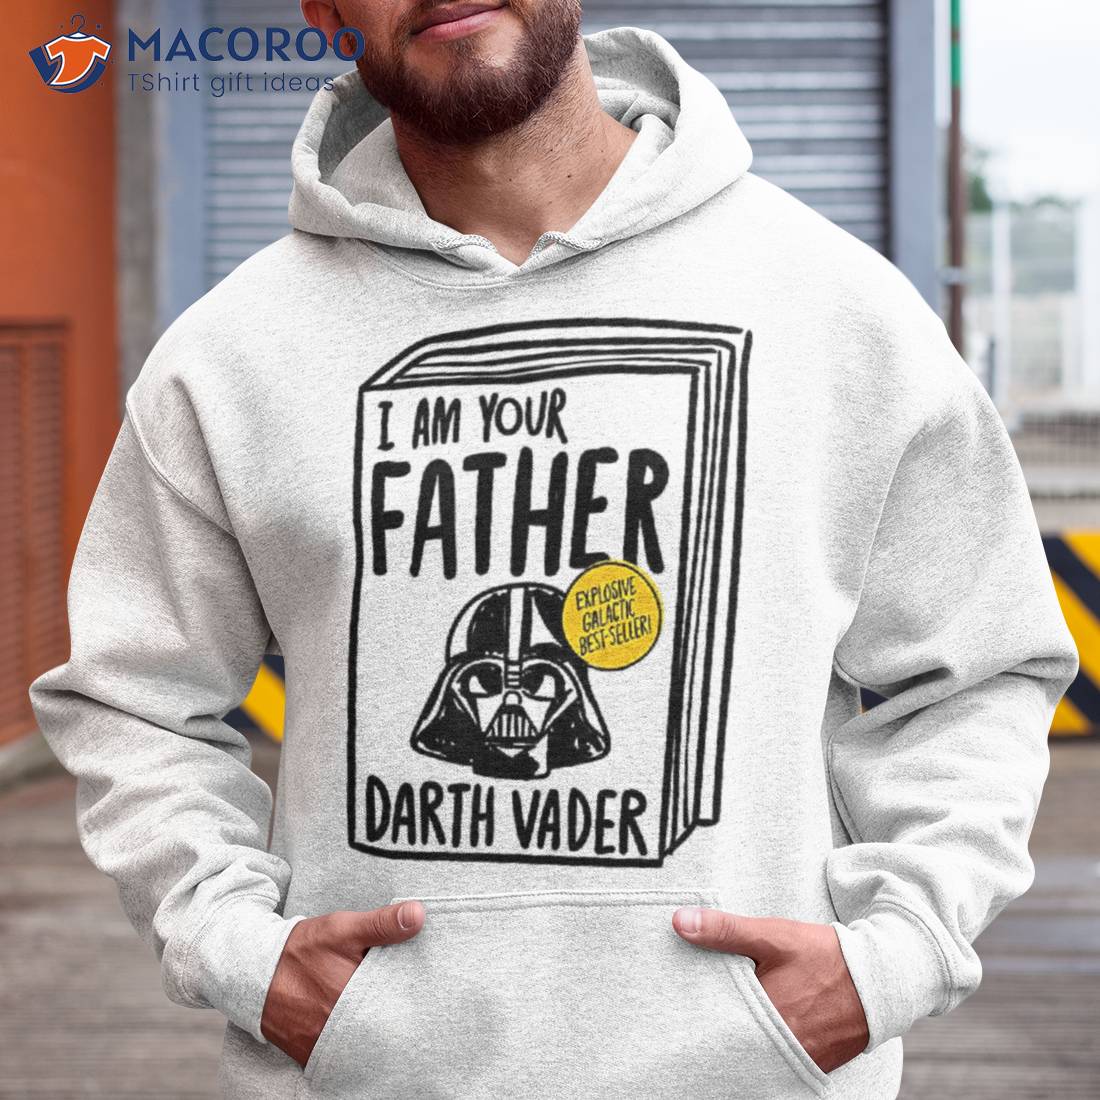 Star Wars Gift Ideas for Adults star wars gift for dad star wars